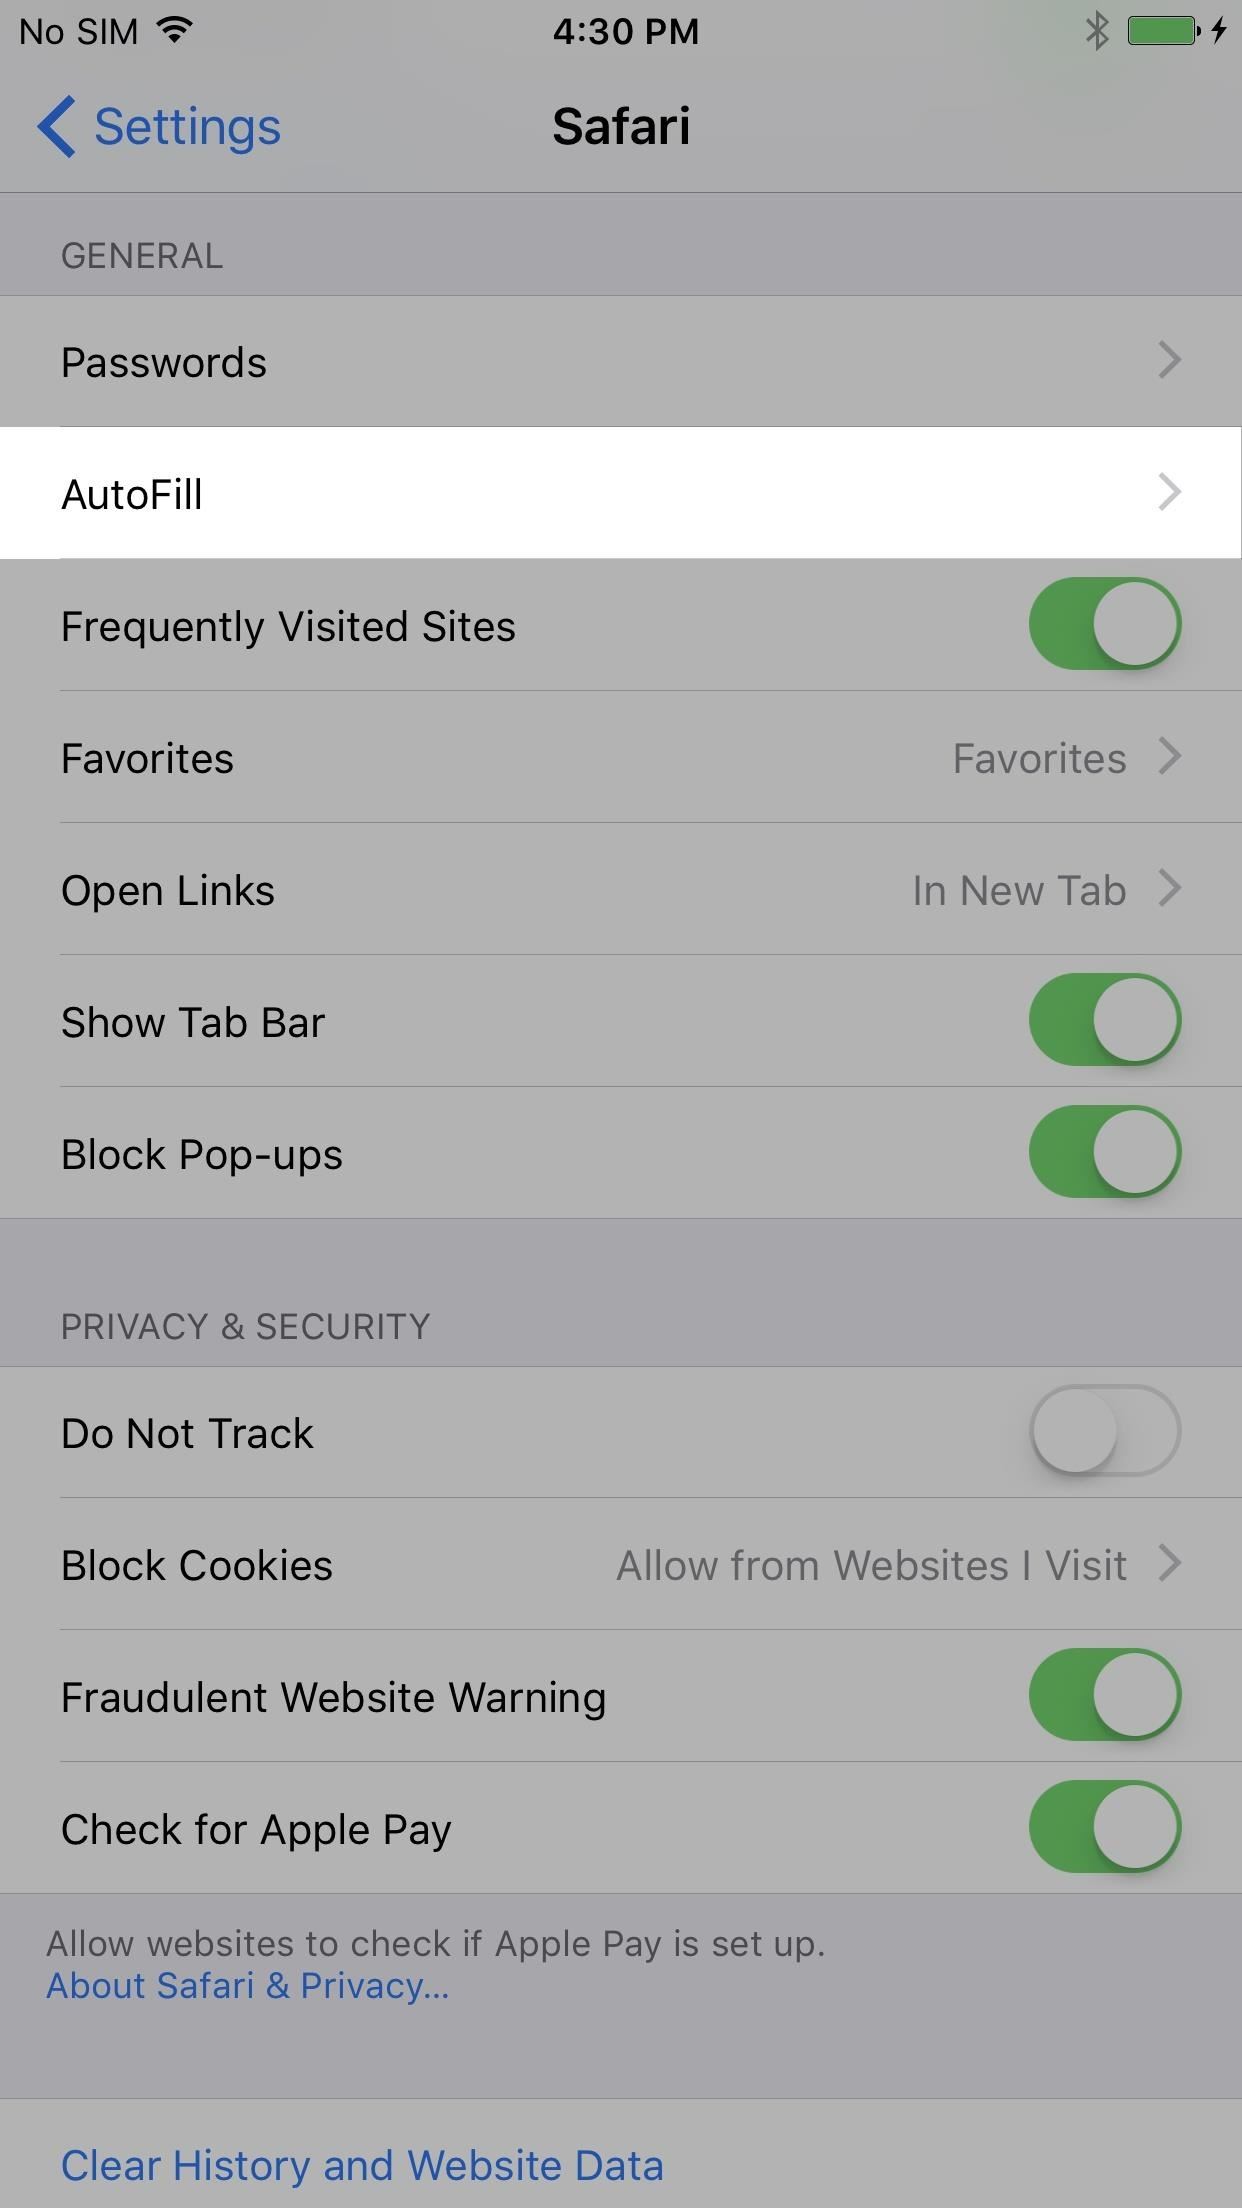 Everything You Need to Disable on Your iPhone for Maximum Security